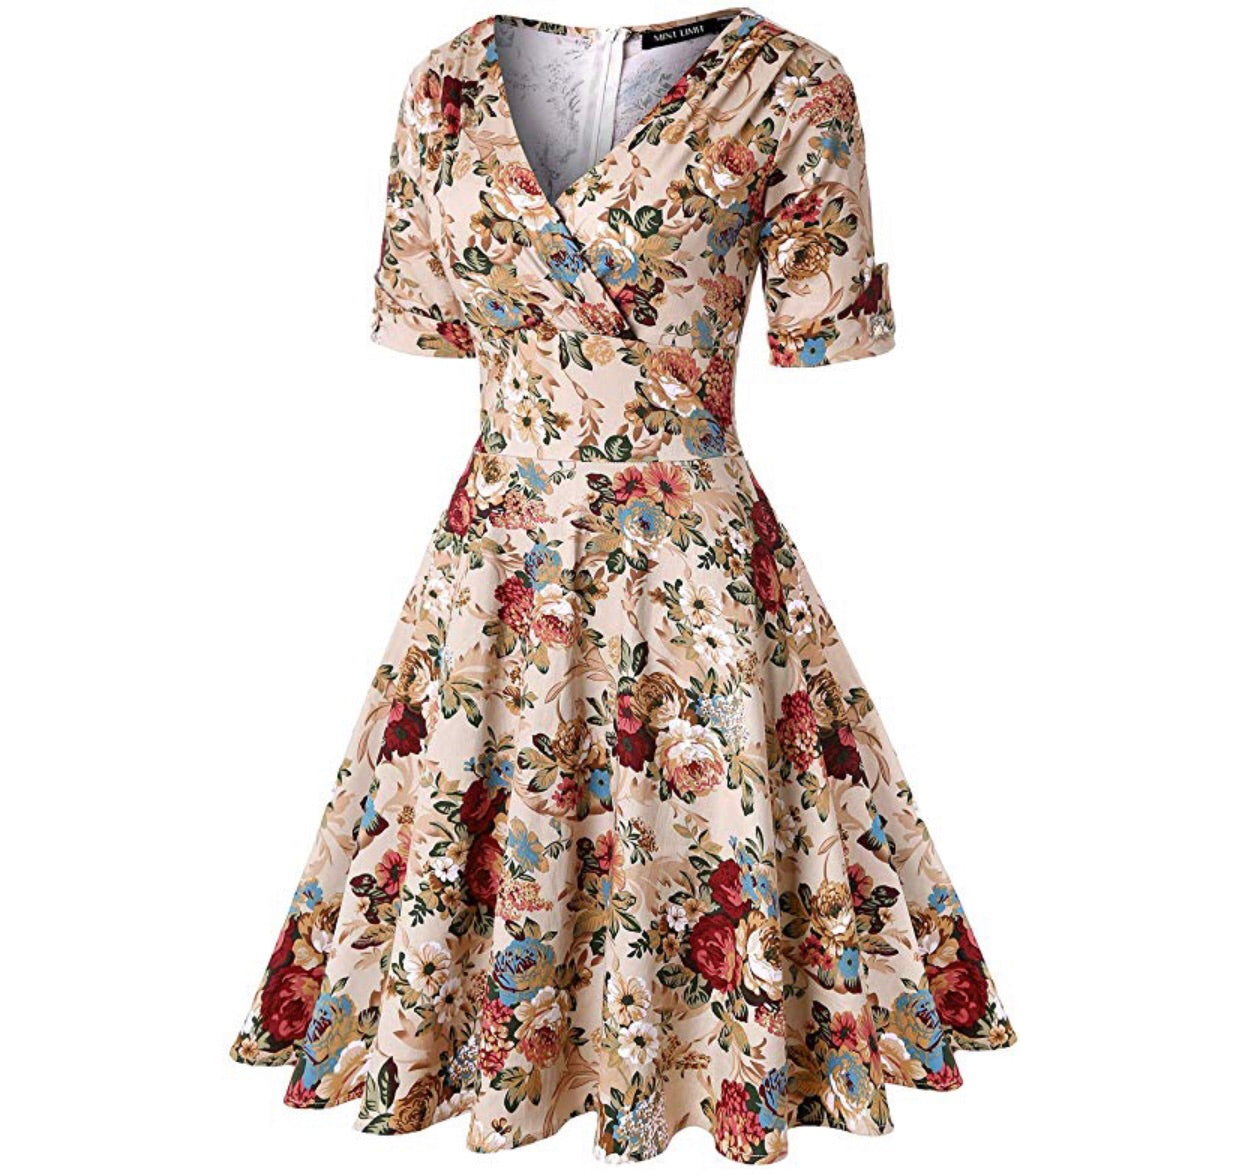 V-Neck Retro Look Swing Dress, Sizes Small - 2XLarge (US Sizes 4 - 22) Floral Apricot